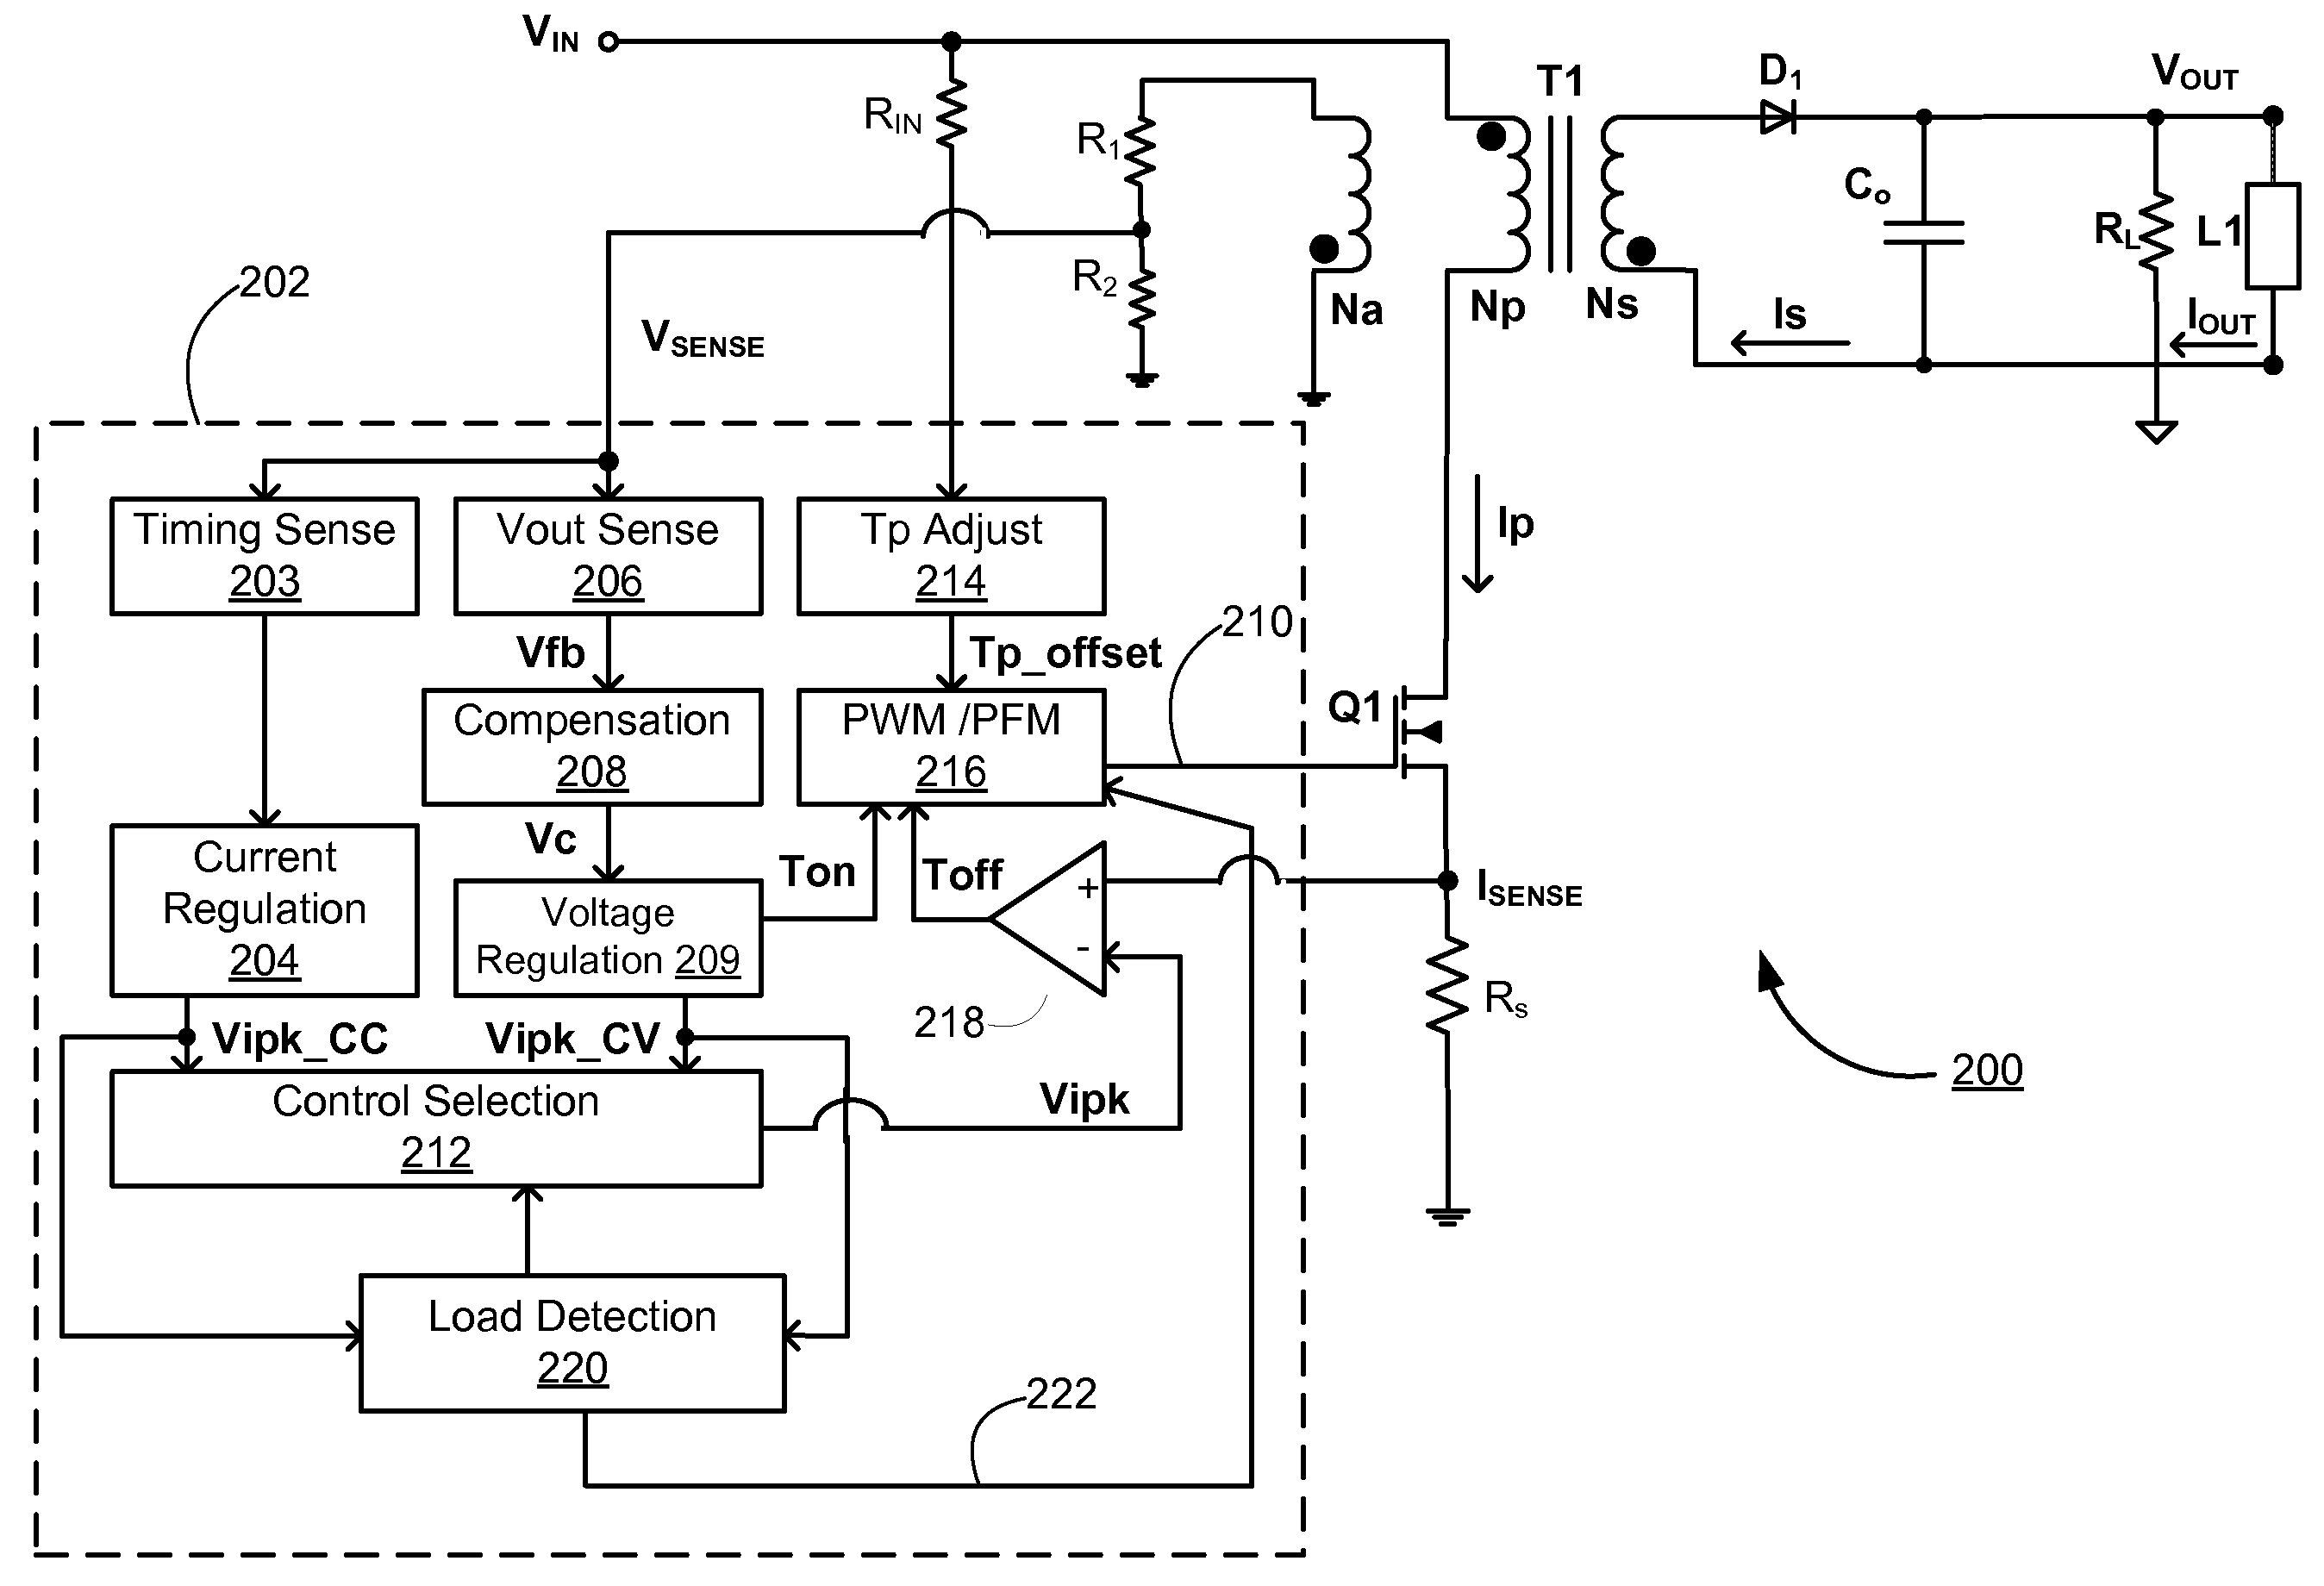 Detecting Light Load Conditions and Improving Light Load Efficiency in a Switching Power Converter